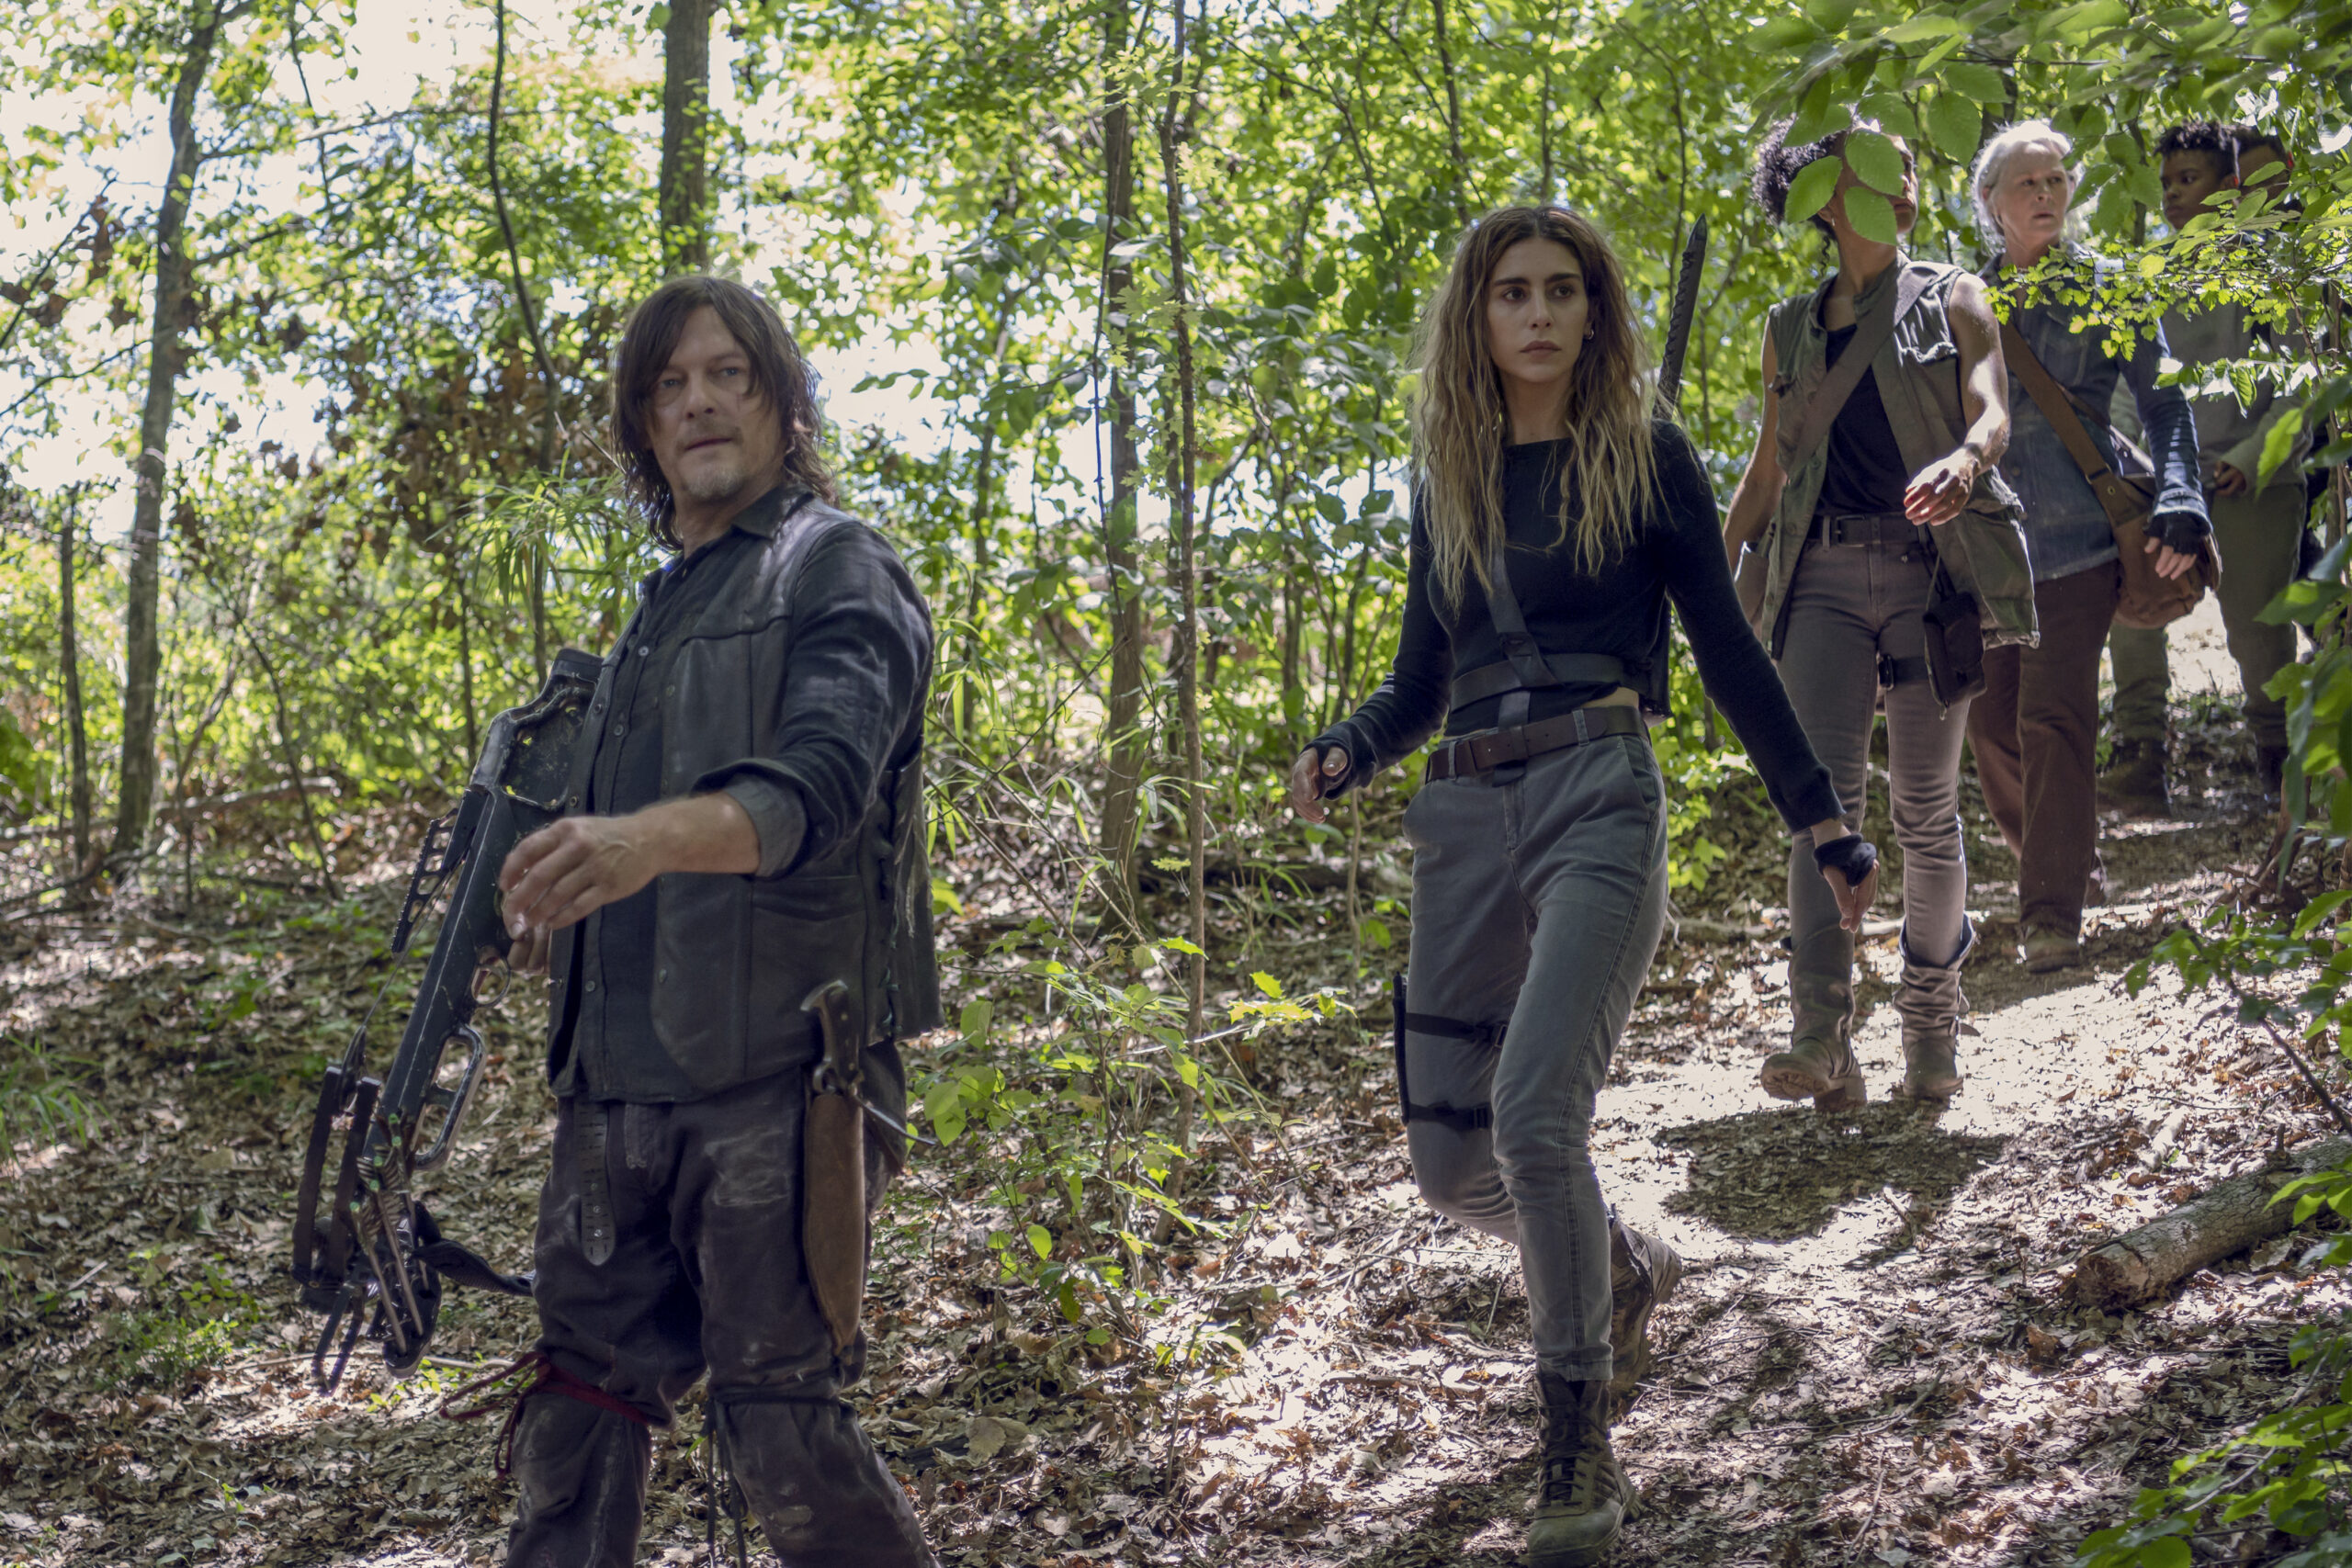 Norman Reedus as Daryl Dixon, Nadia Hilker as Magna, Lauren Ridloff as Connie, Melissa McBride as Carol, Angel Theory as Kelly - The Walking Dead _ Season 10, Episode 8 - Photo Credit: Gene Page/AM8